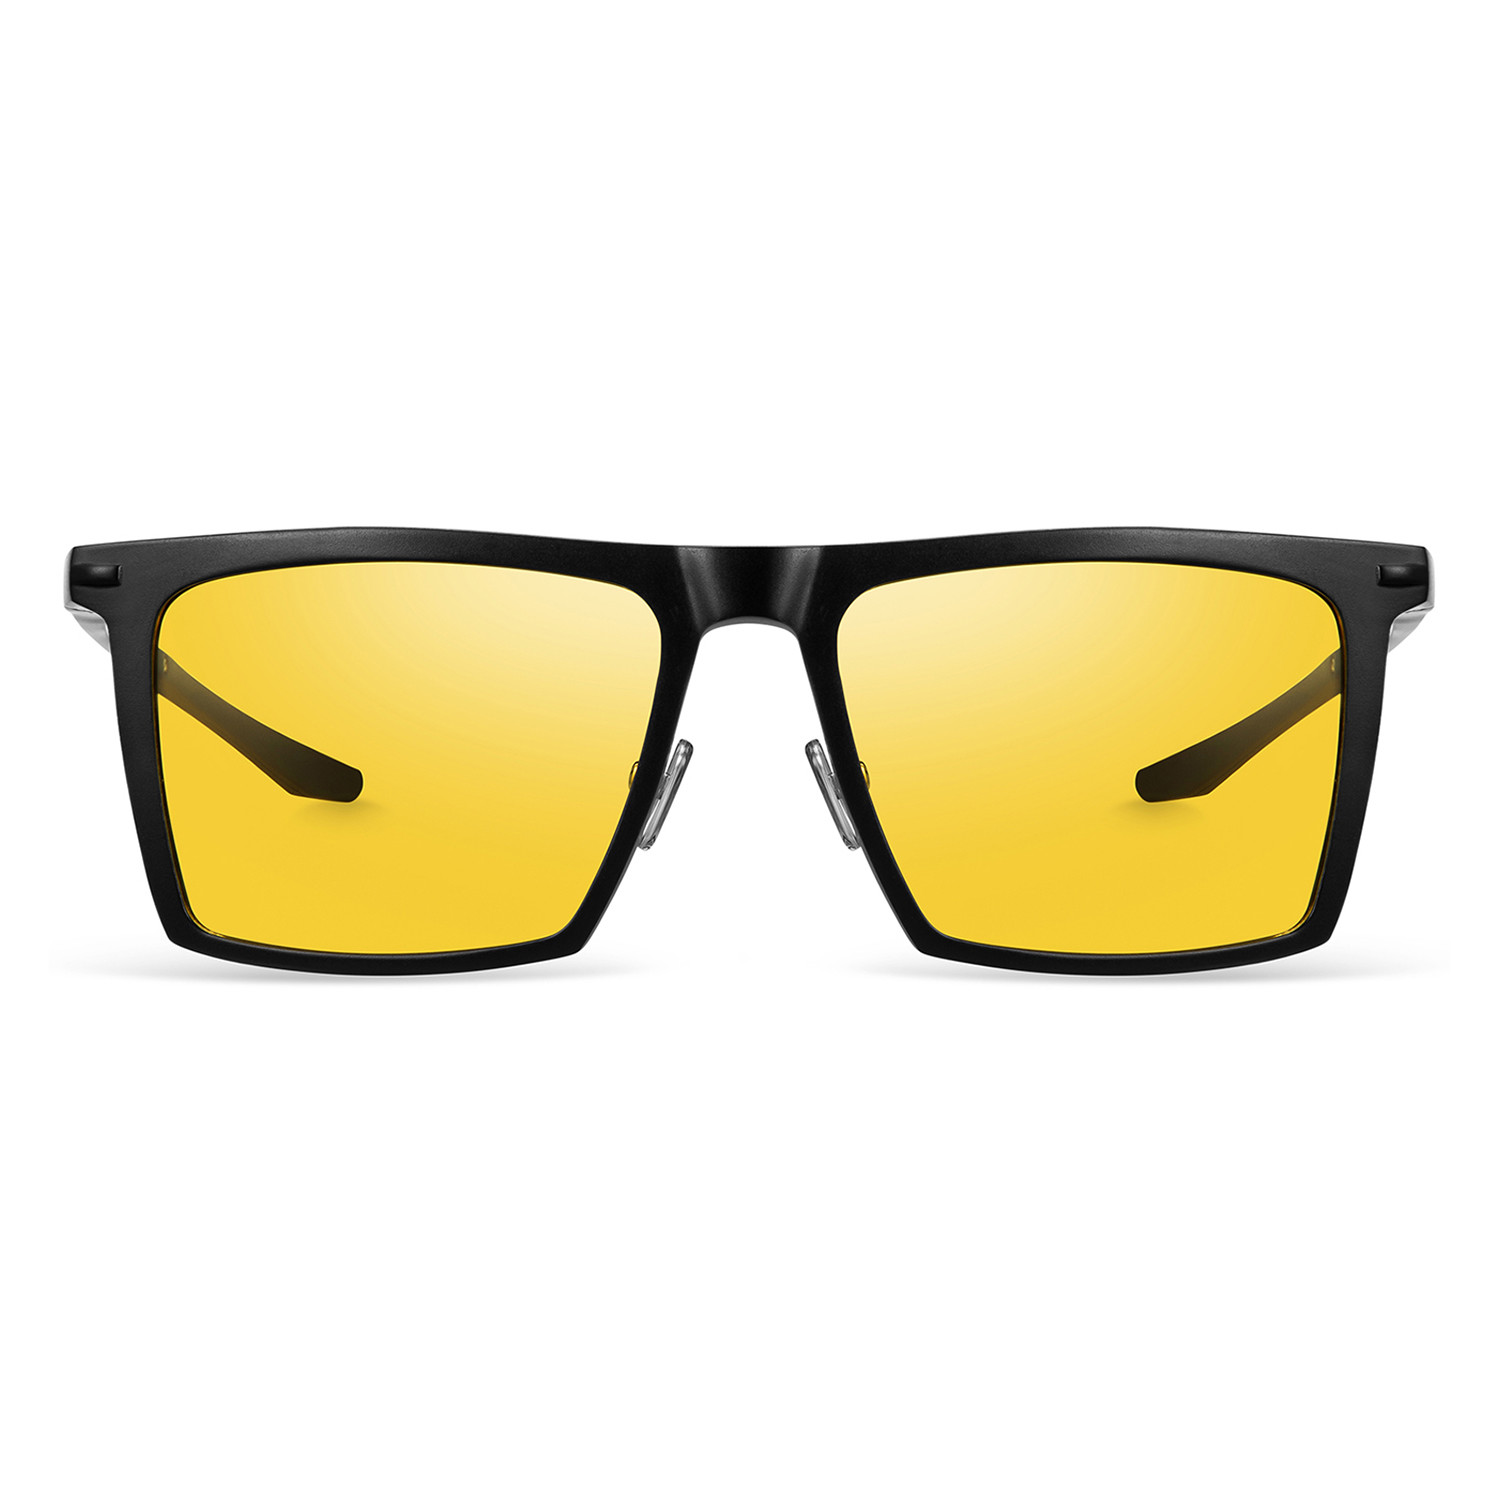 Night Vision Glasses 8138 Black Soxick Touch Of Modern